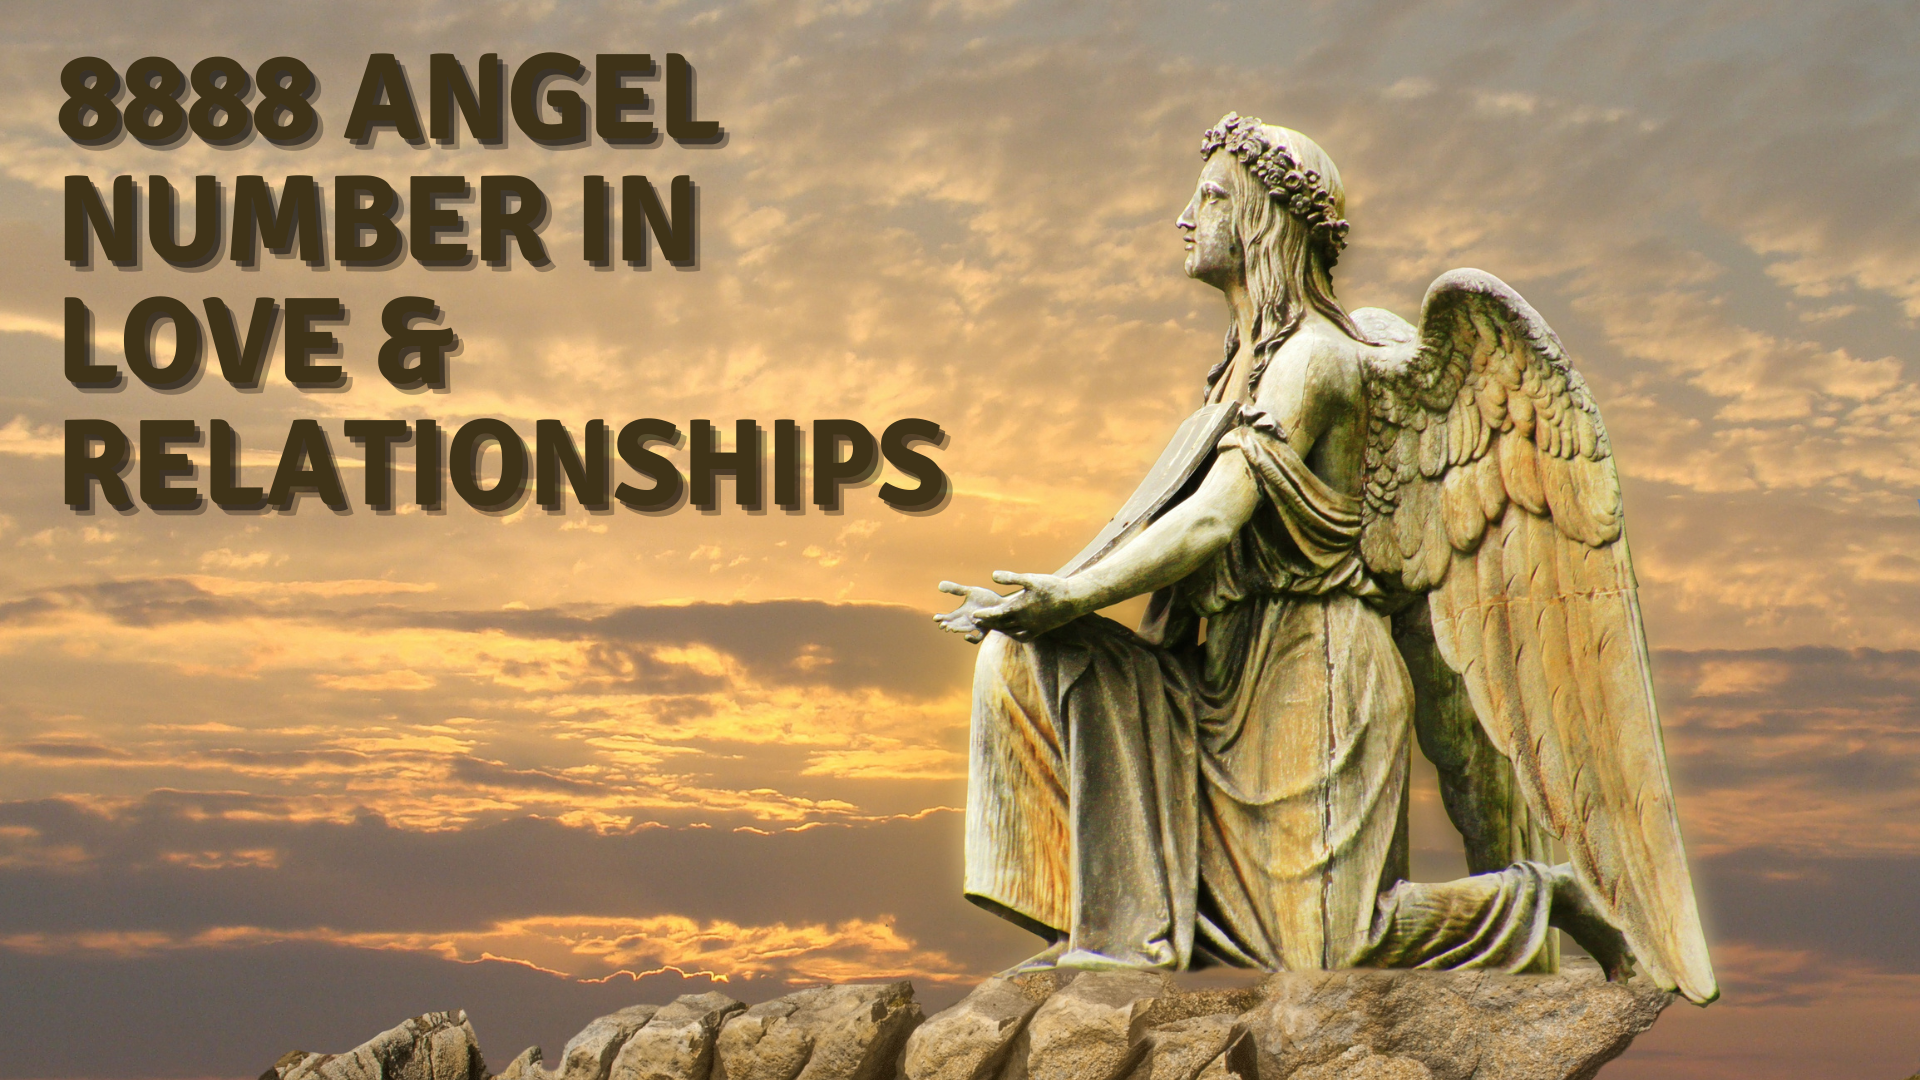 A kneeling angel statue with words 8888 Angel Number in Love & Relationships